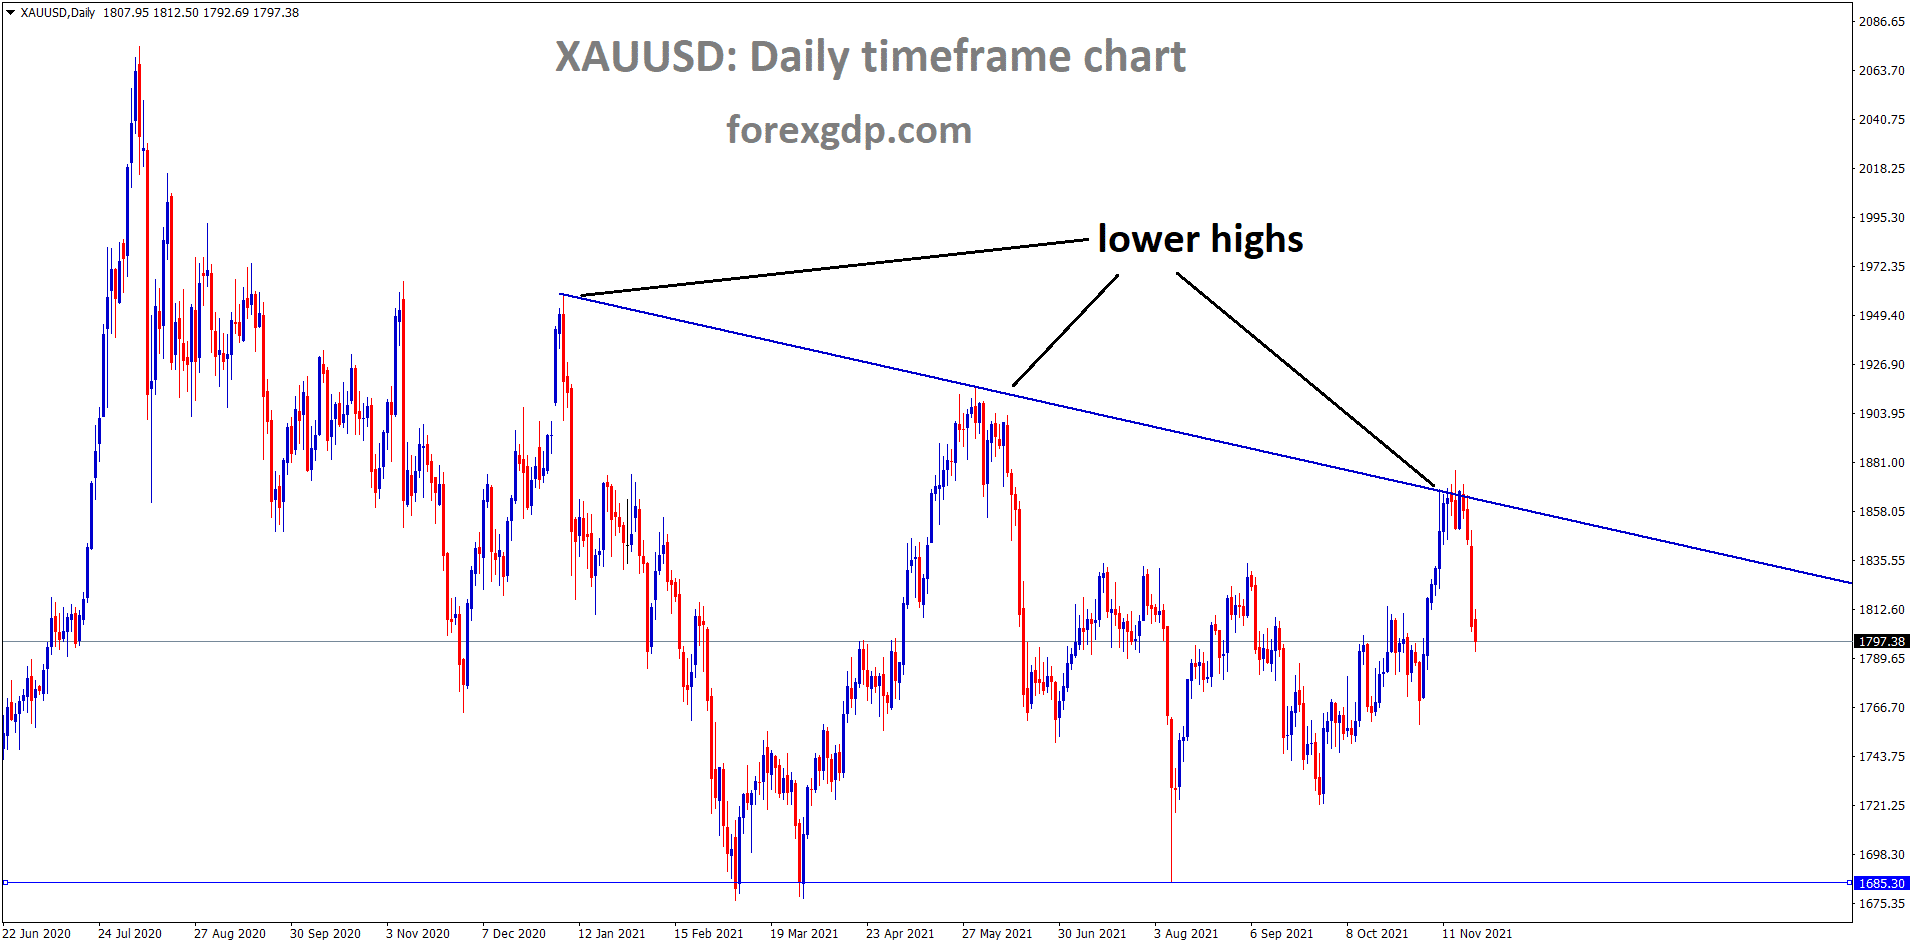 XAUUSD Gold price is moving in the Descending triangle pattern and the market fell from the lower high area